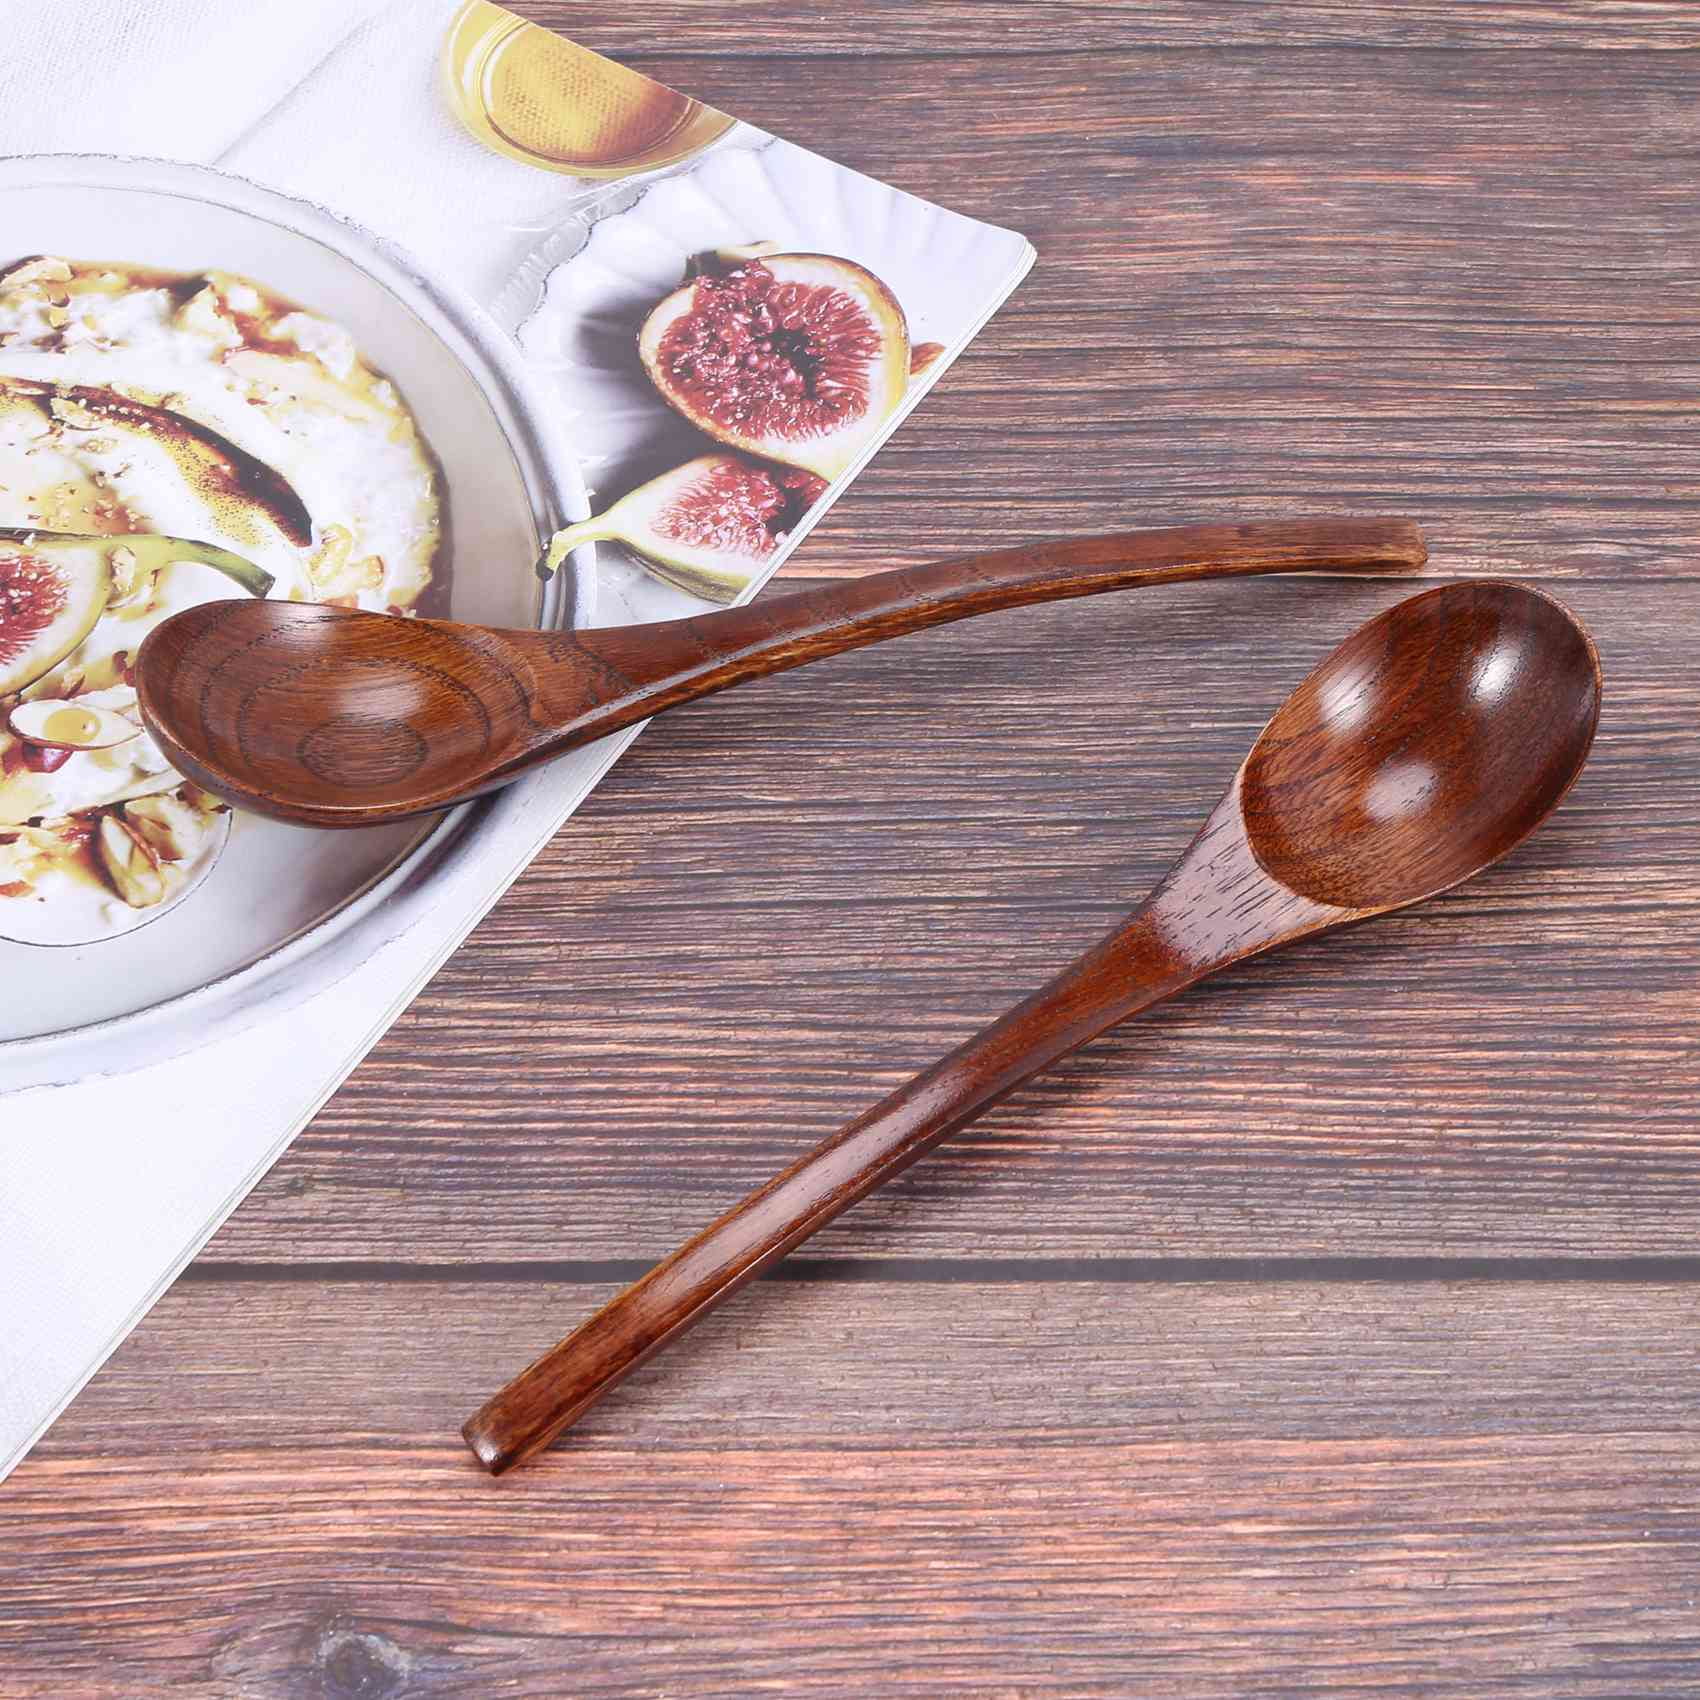 Natural Wood Tortoise Shell Soup Ladle/ Ramen Spoon – Object of Living